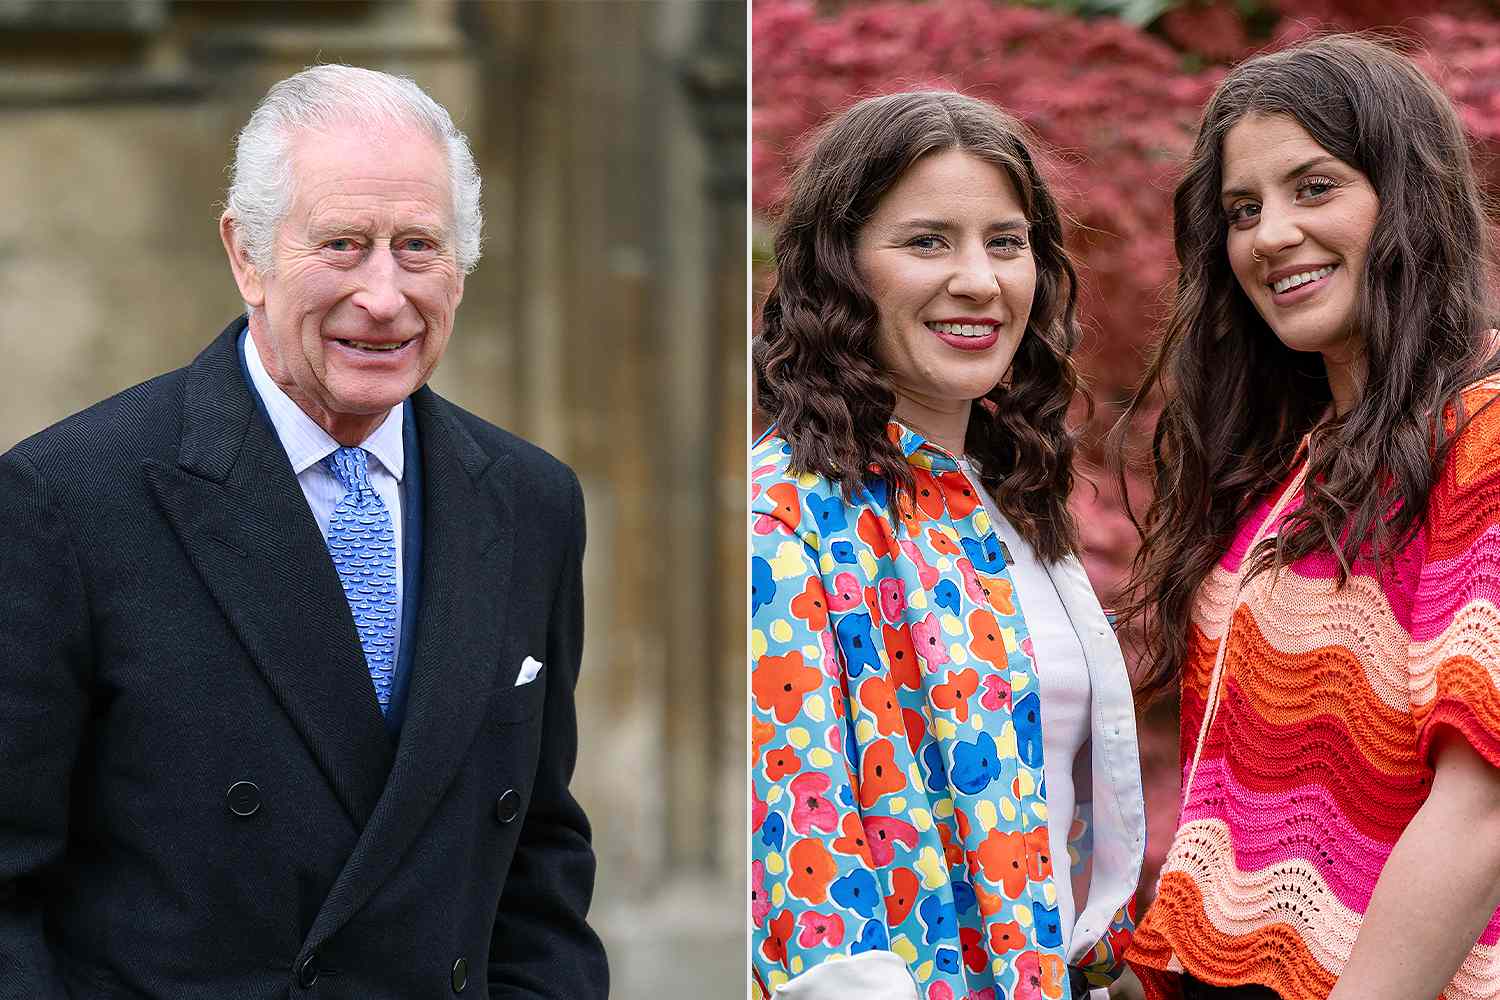 King Charles Honors Twin Who Fought Crocodile Off Sister by Punching Snout [Video]